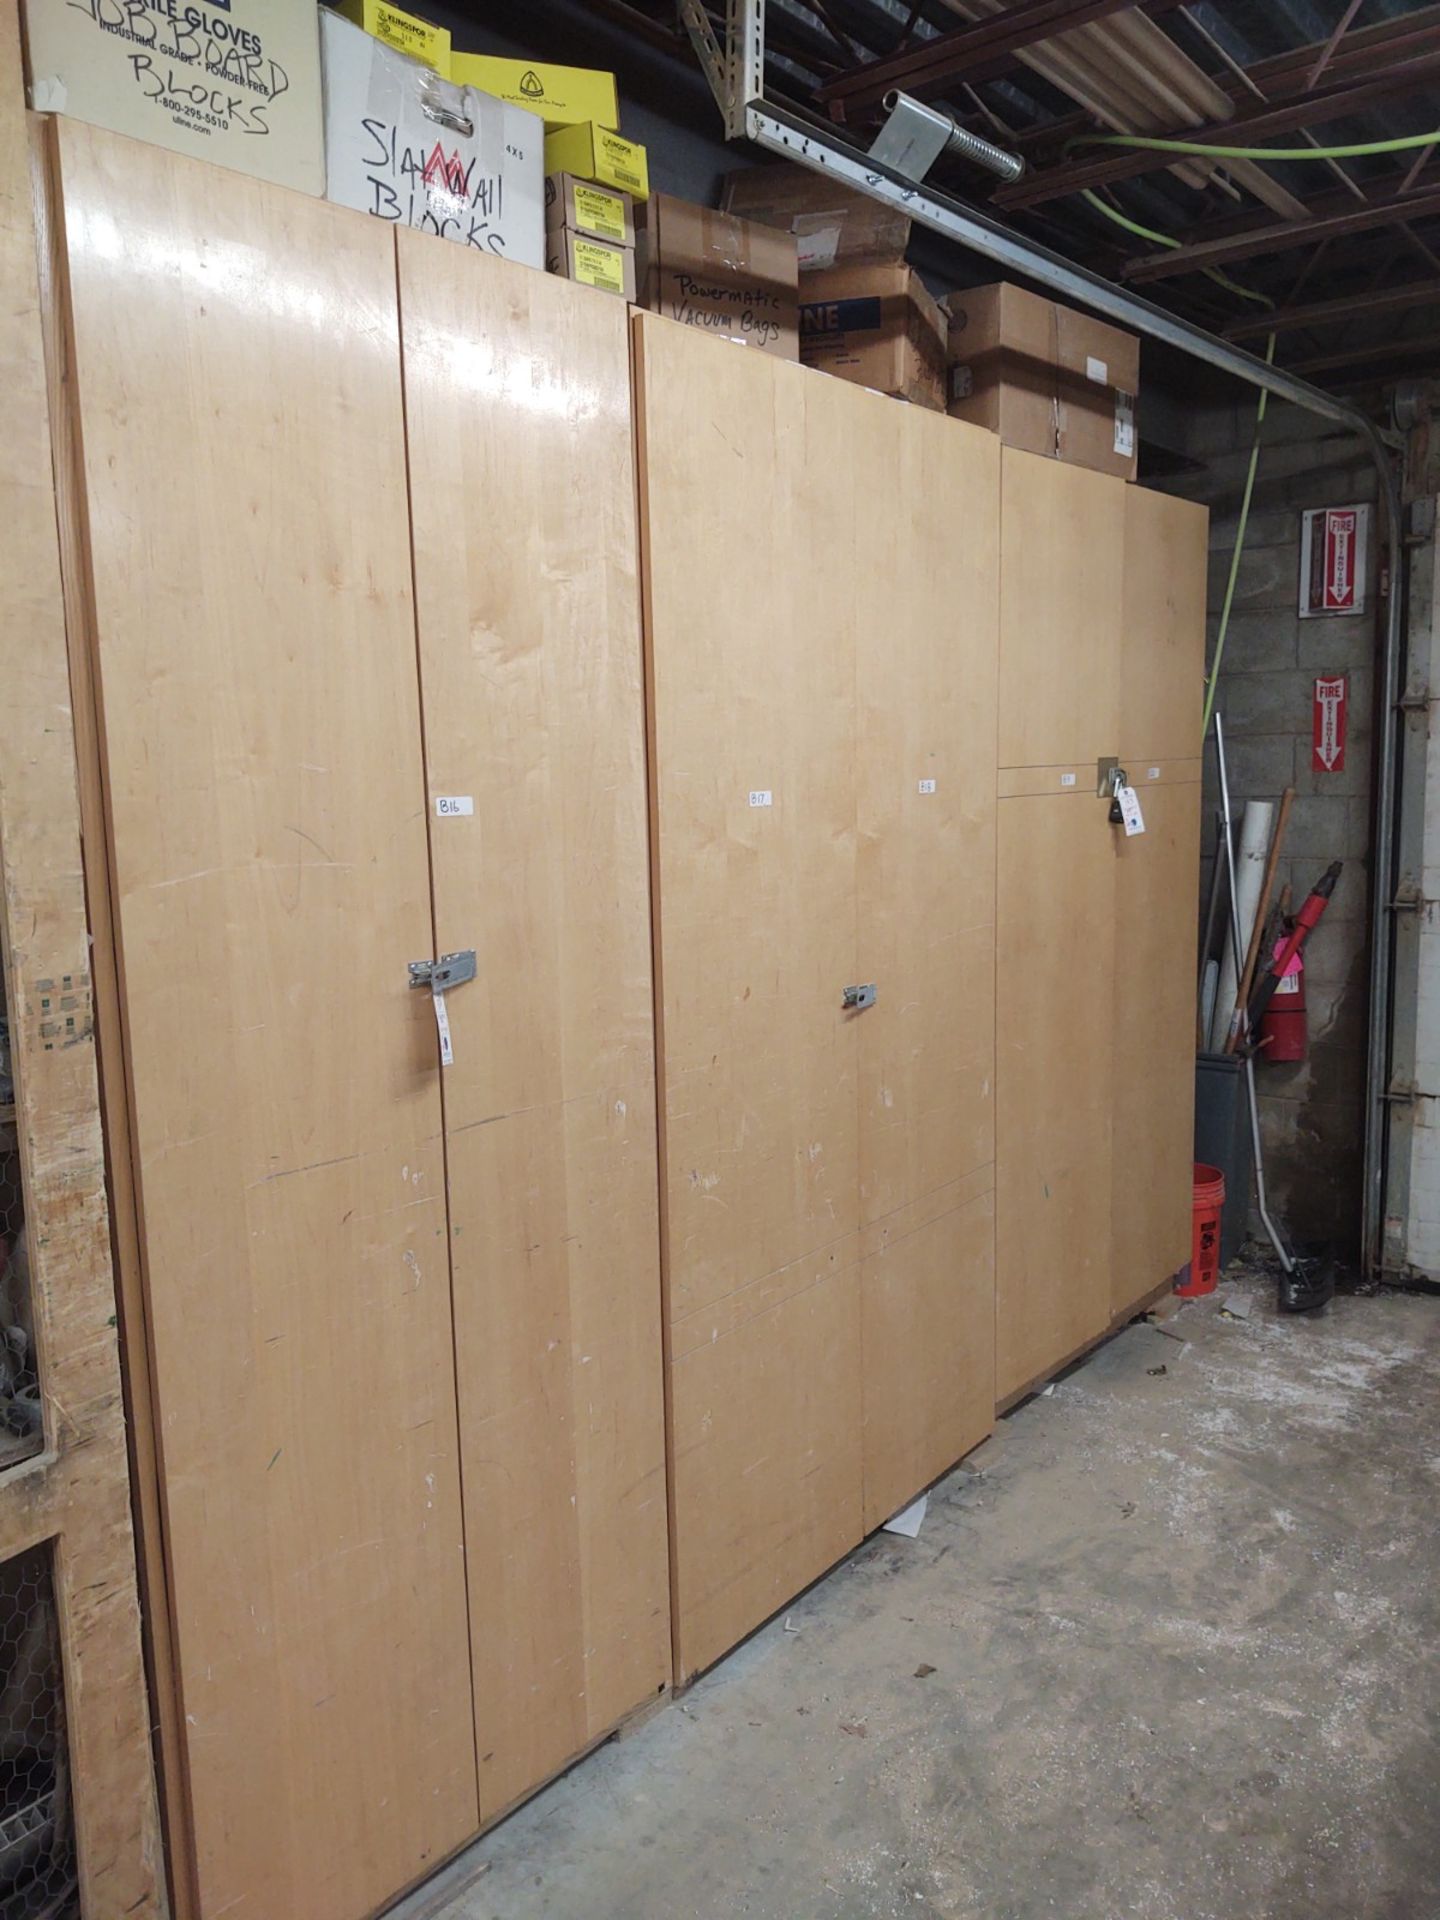 (Lot) in and On 3 Cabinets C/O: Abrasive discs, Pads, Sheets and Wood Filler In One Area(